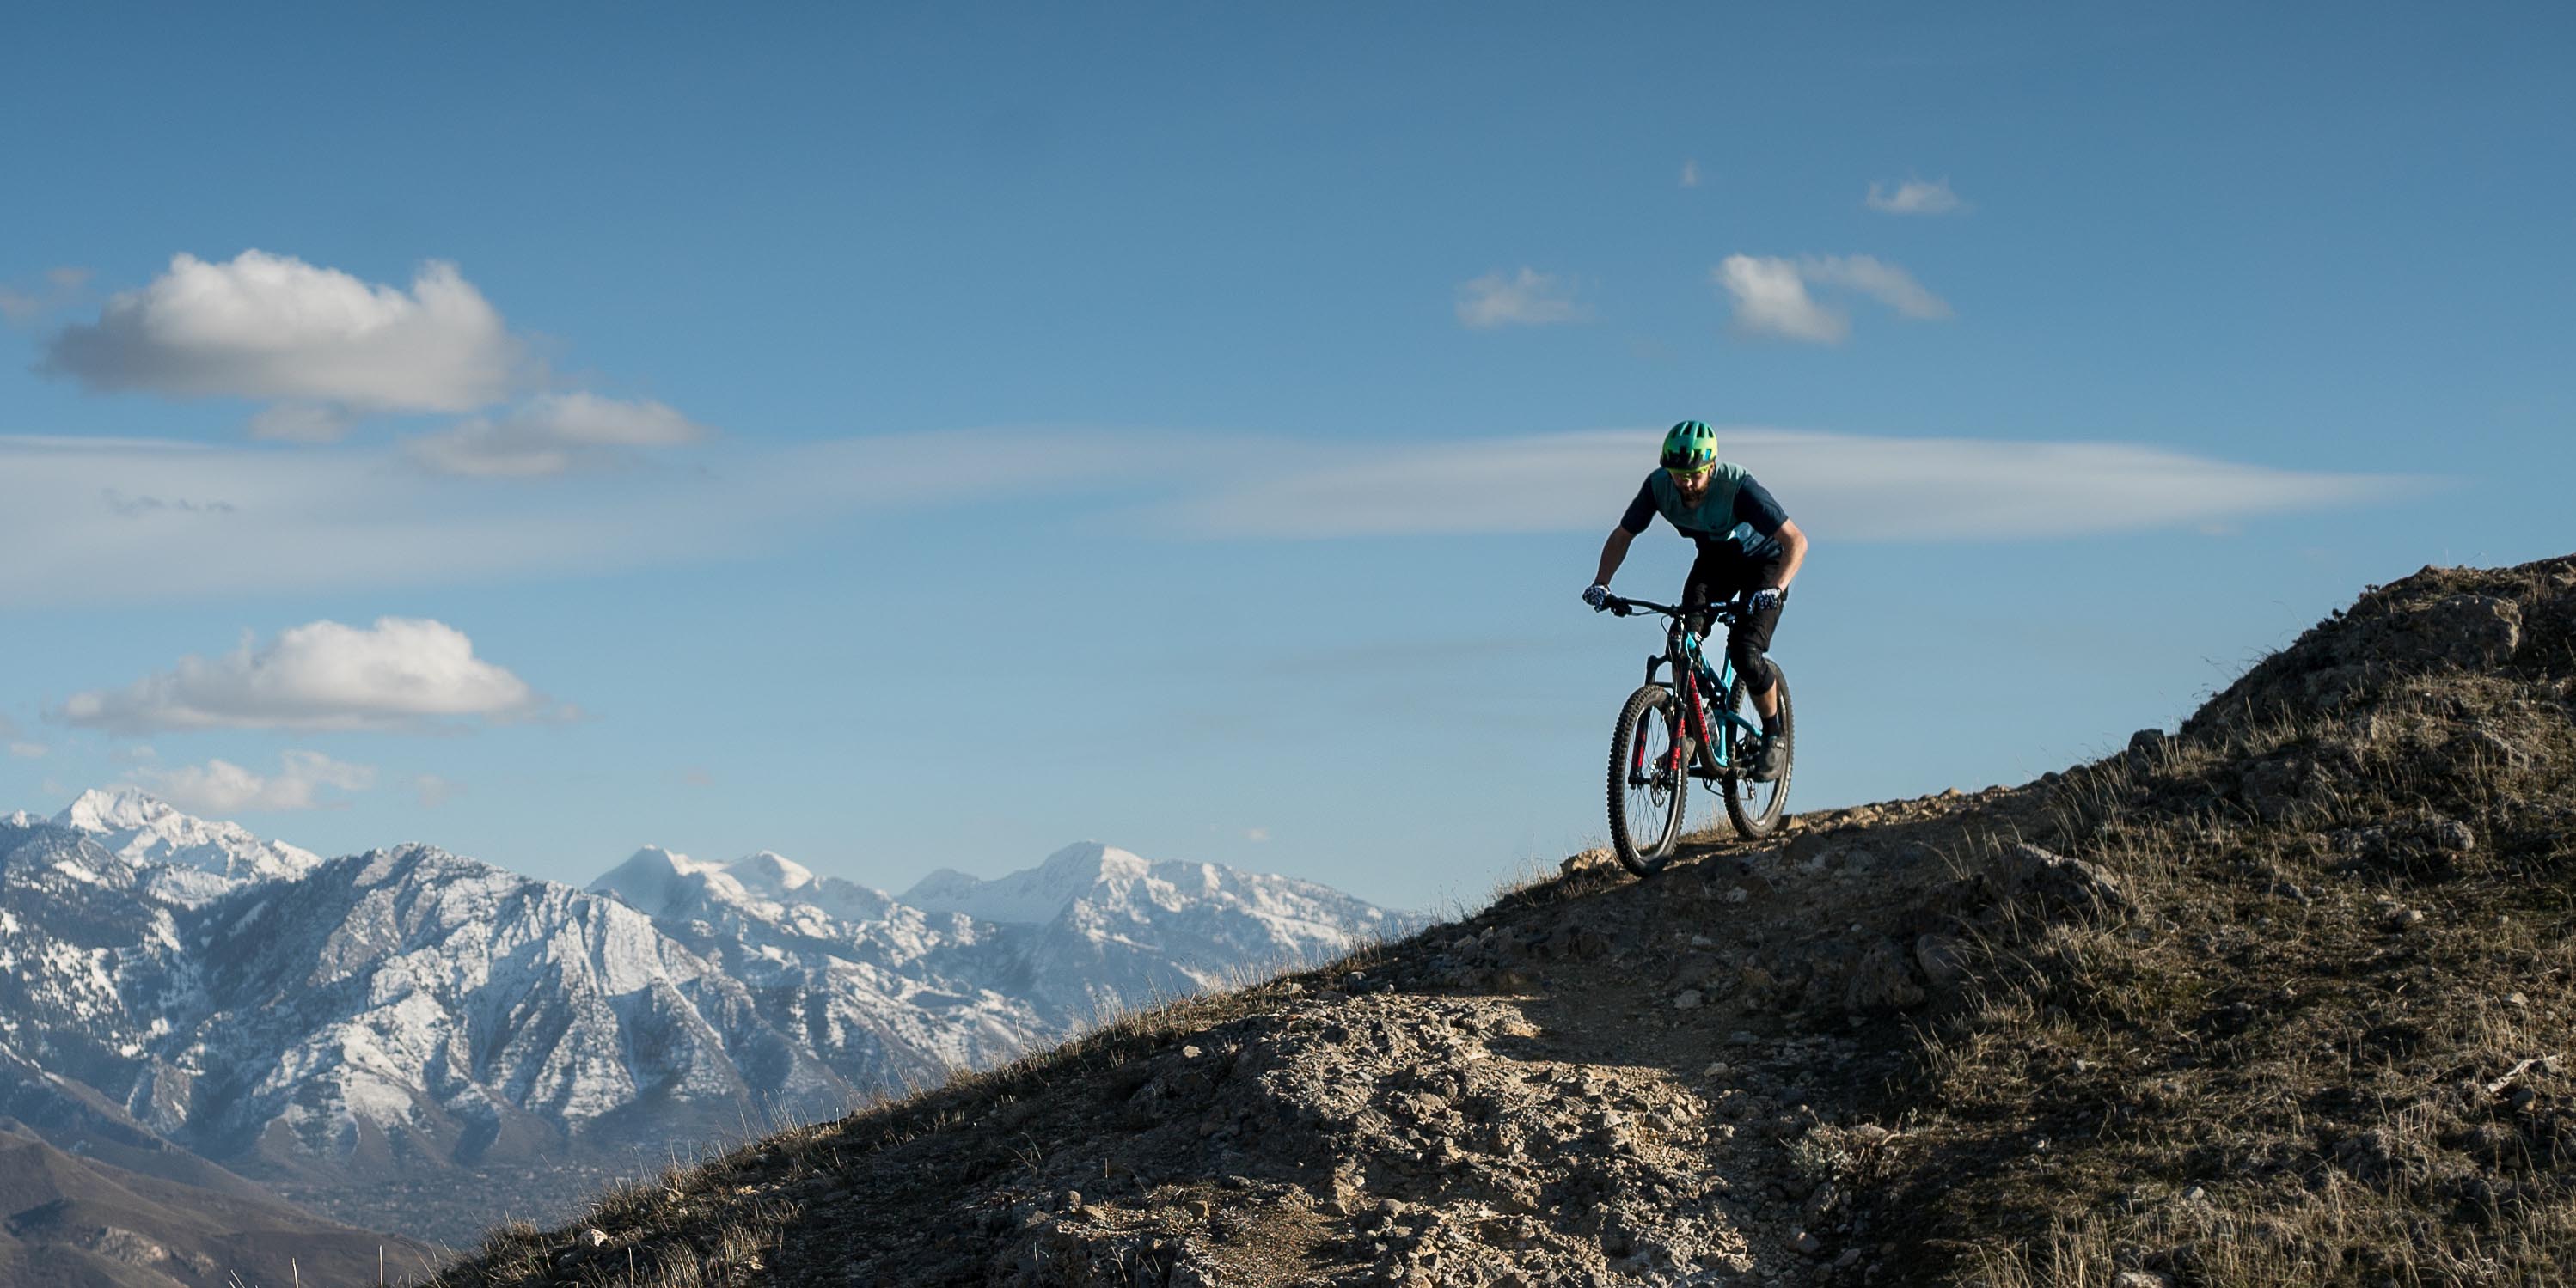 Mountain bike rider descending a ridgeline with snow-capped peaks in the background